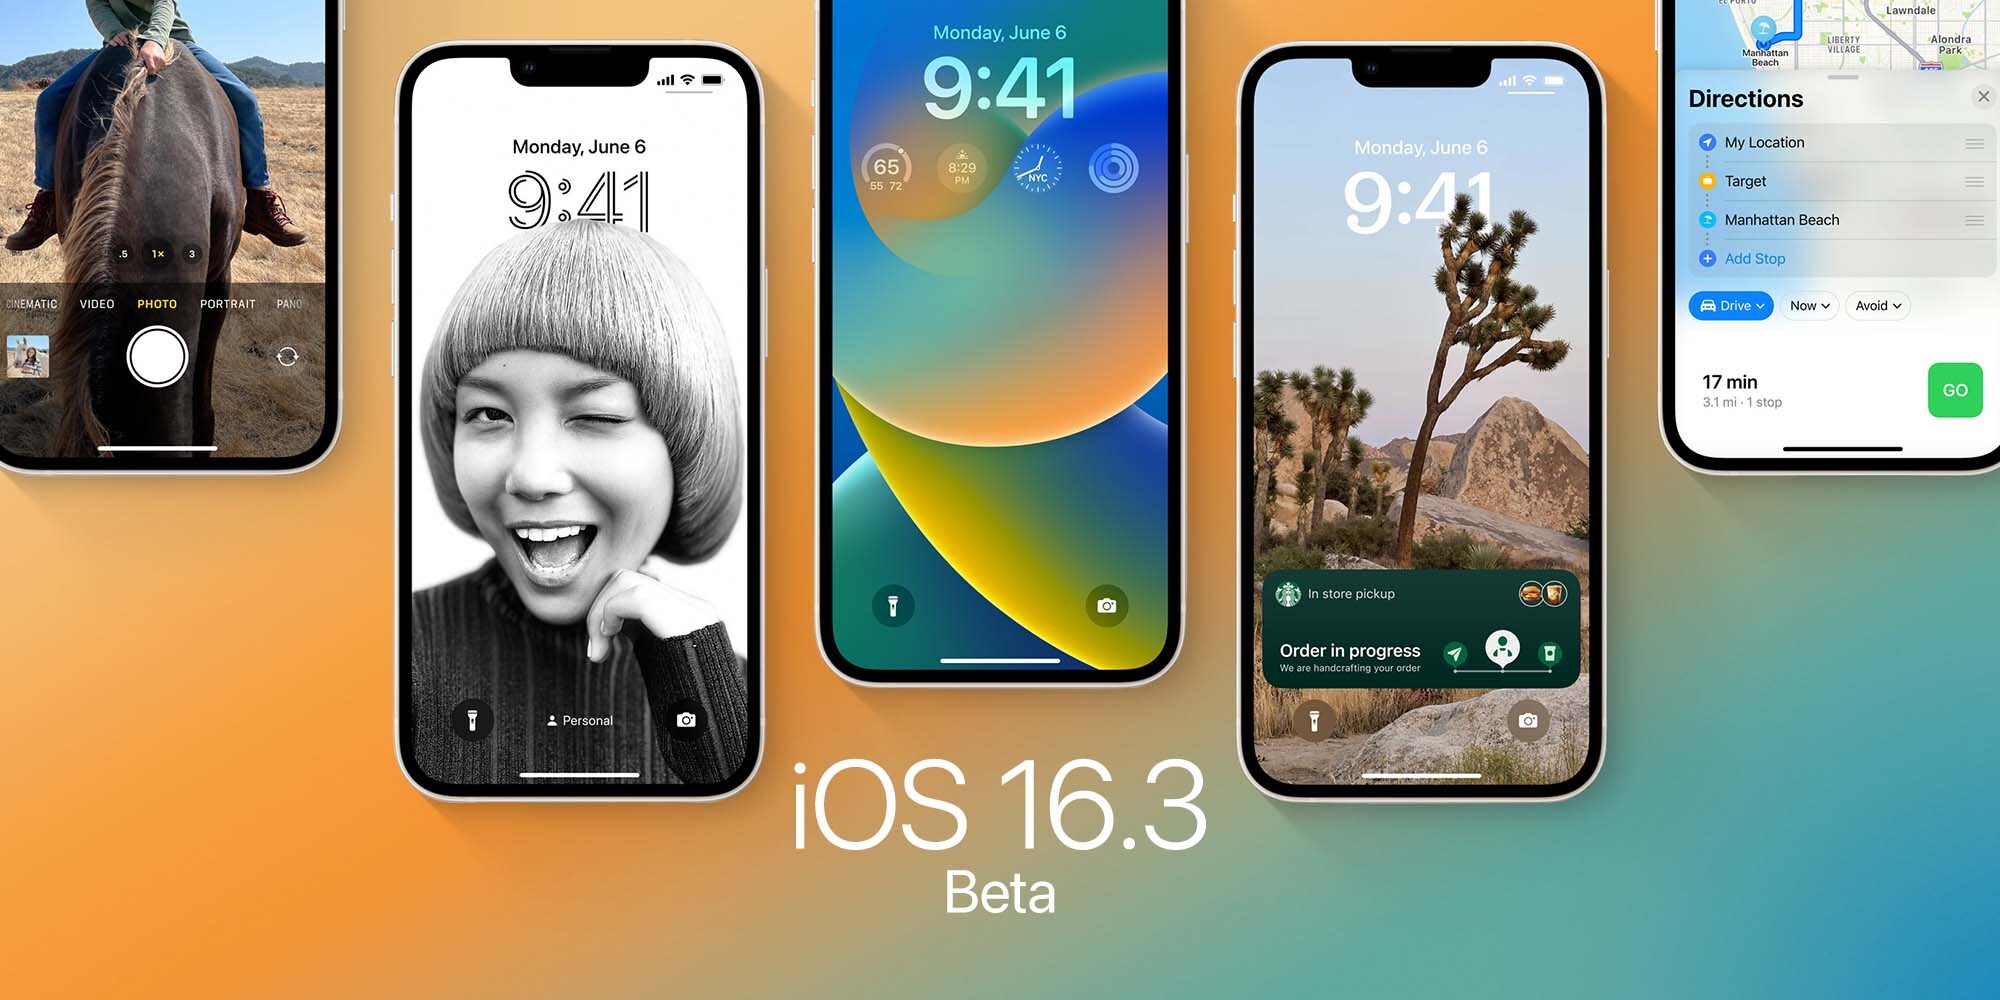 iOS 16.3 beta 2 now rolling out, here's what's new so far [U: Public beta]  - 9to5Mac